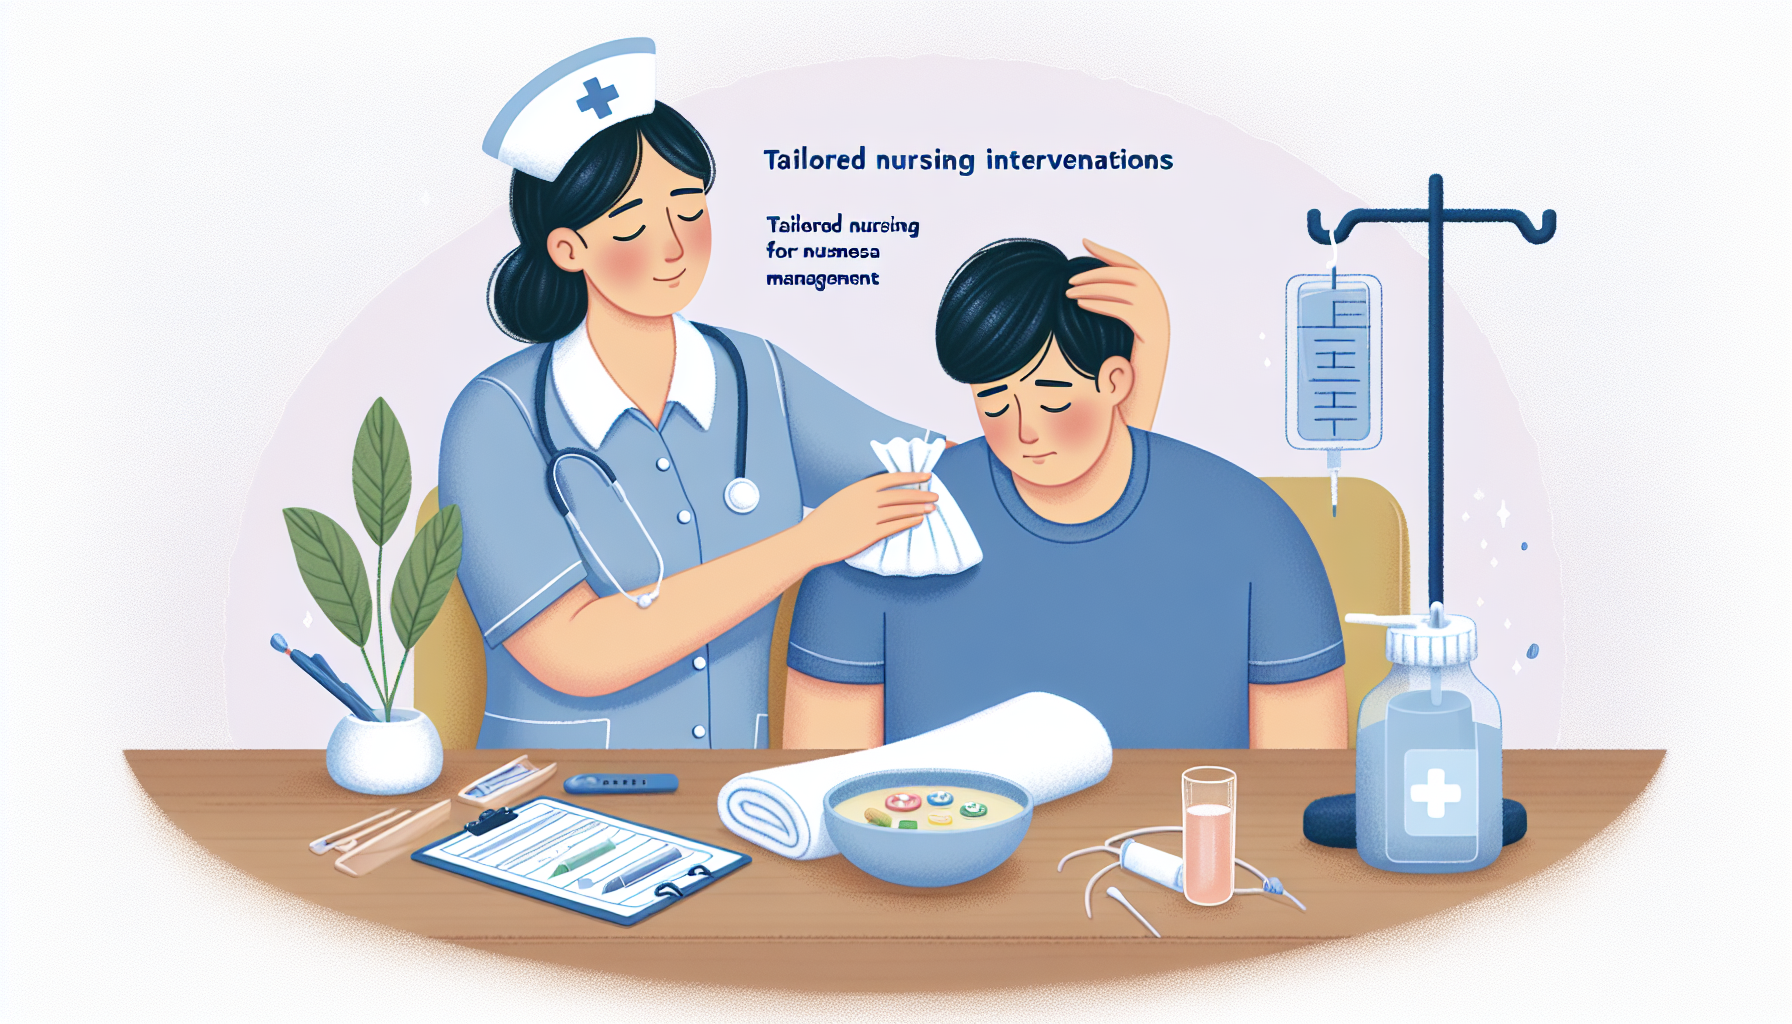 Illustration of a nurse providing personalized care to a patient experiencing nausea